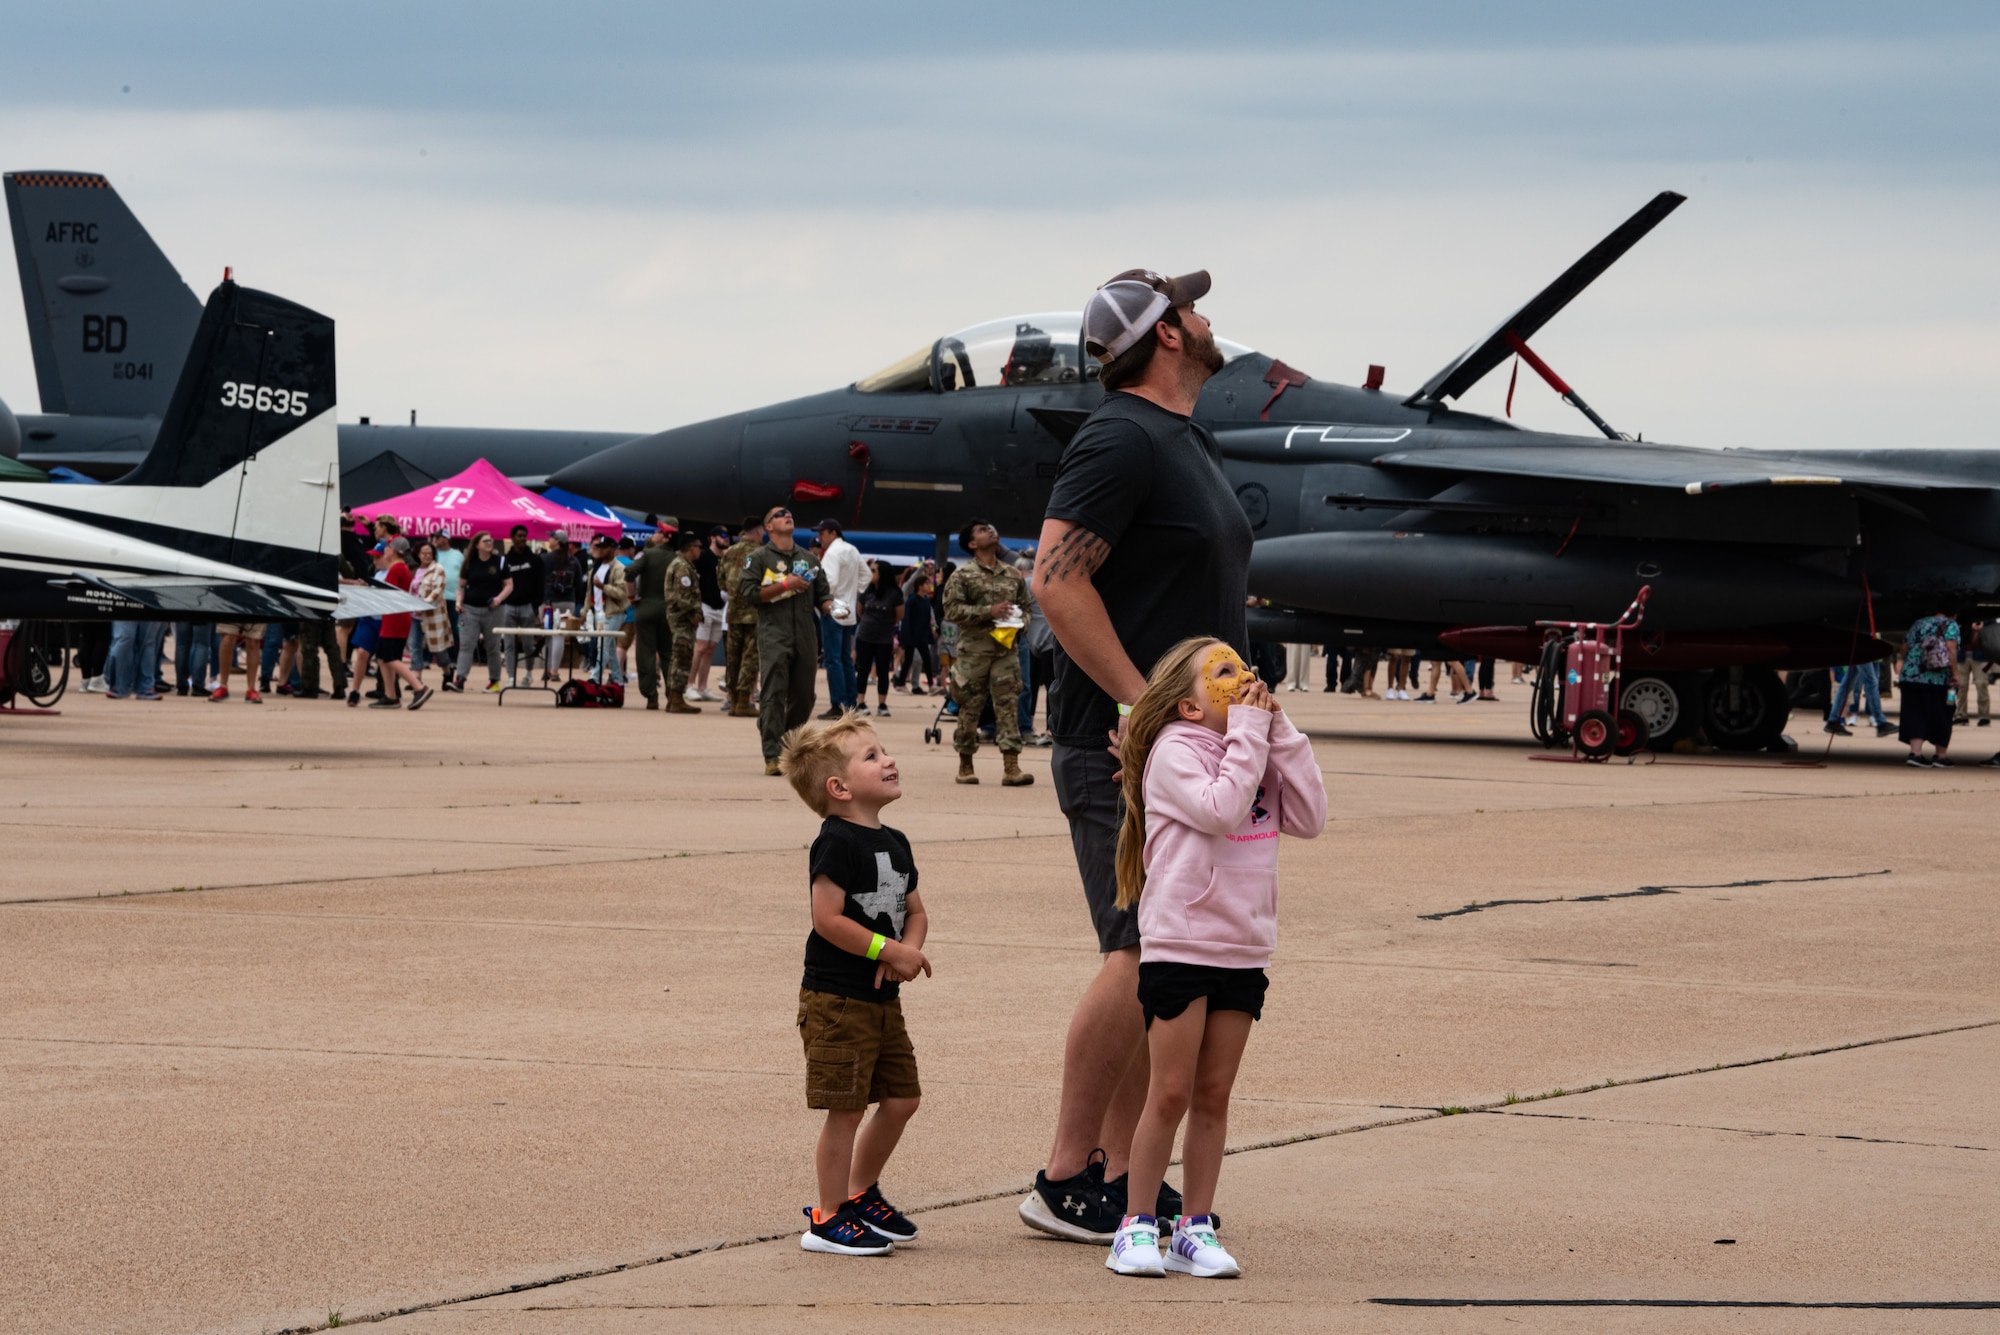 Air show attendees observe static displays during the 2023 Dyess Big Country Air Fest on Dyess Air Force Base, Texas, April 22, 2023. More than 30,000 event goers attended the one-day event highlighting the best of America’s only Lift and Strike base, Air Force heritage and Dyess community partners. The air show featured the F-22 Raptor demo team, U.S. Air Force Academy Wings of Blue, U.S. Army Golden Knights, WW II heritage flight and B-1B Lancer and C-130J Super Hercules fly overs. (U.S. Air Force photo by Airman 1st Class Alondra Cristobal Hernandez)